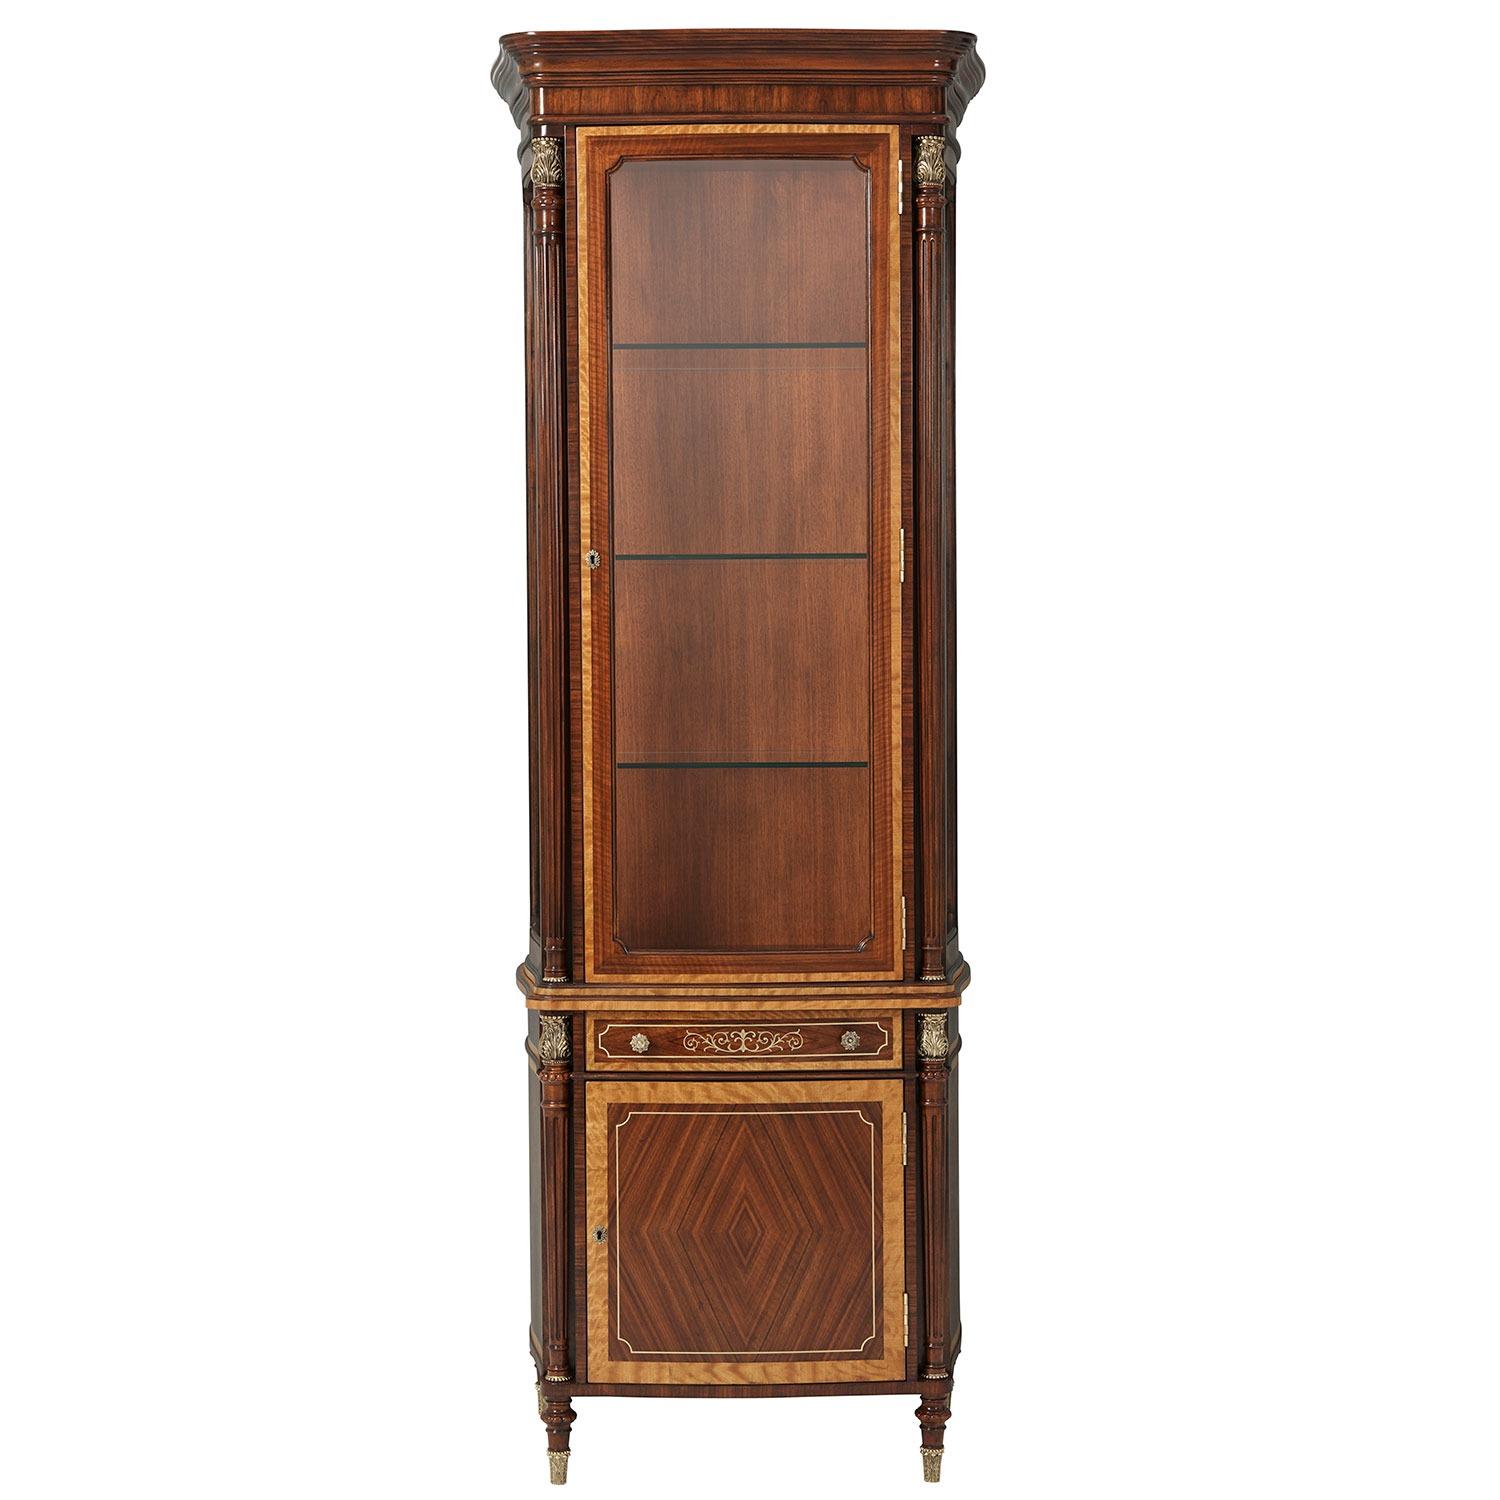 An exclusive left facing display cabinet. The meticulous construction in mahogany, adorned with floral and line brass inlay, exudes timeless elegance. The richly-figured Etimoe veneer, sourced from Central Africa, adds a touch of exotic allure to